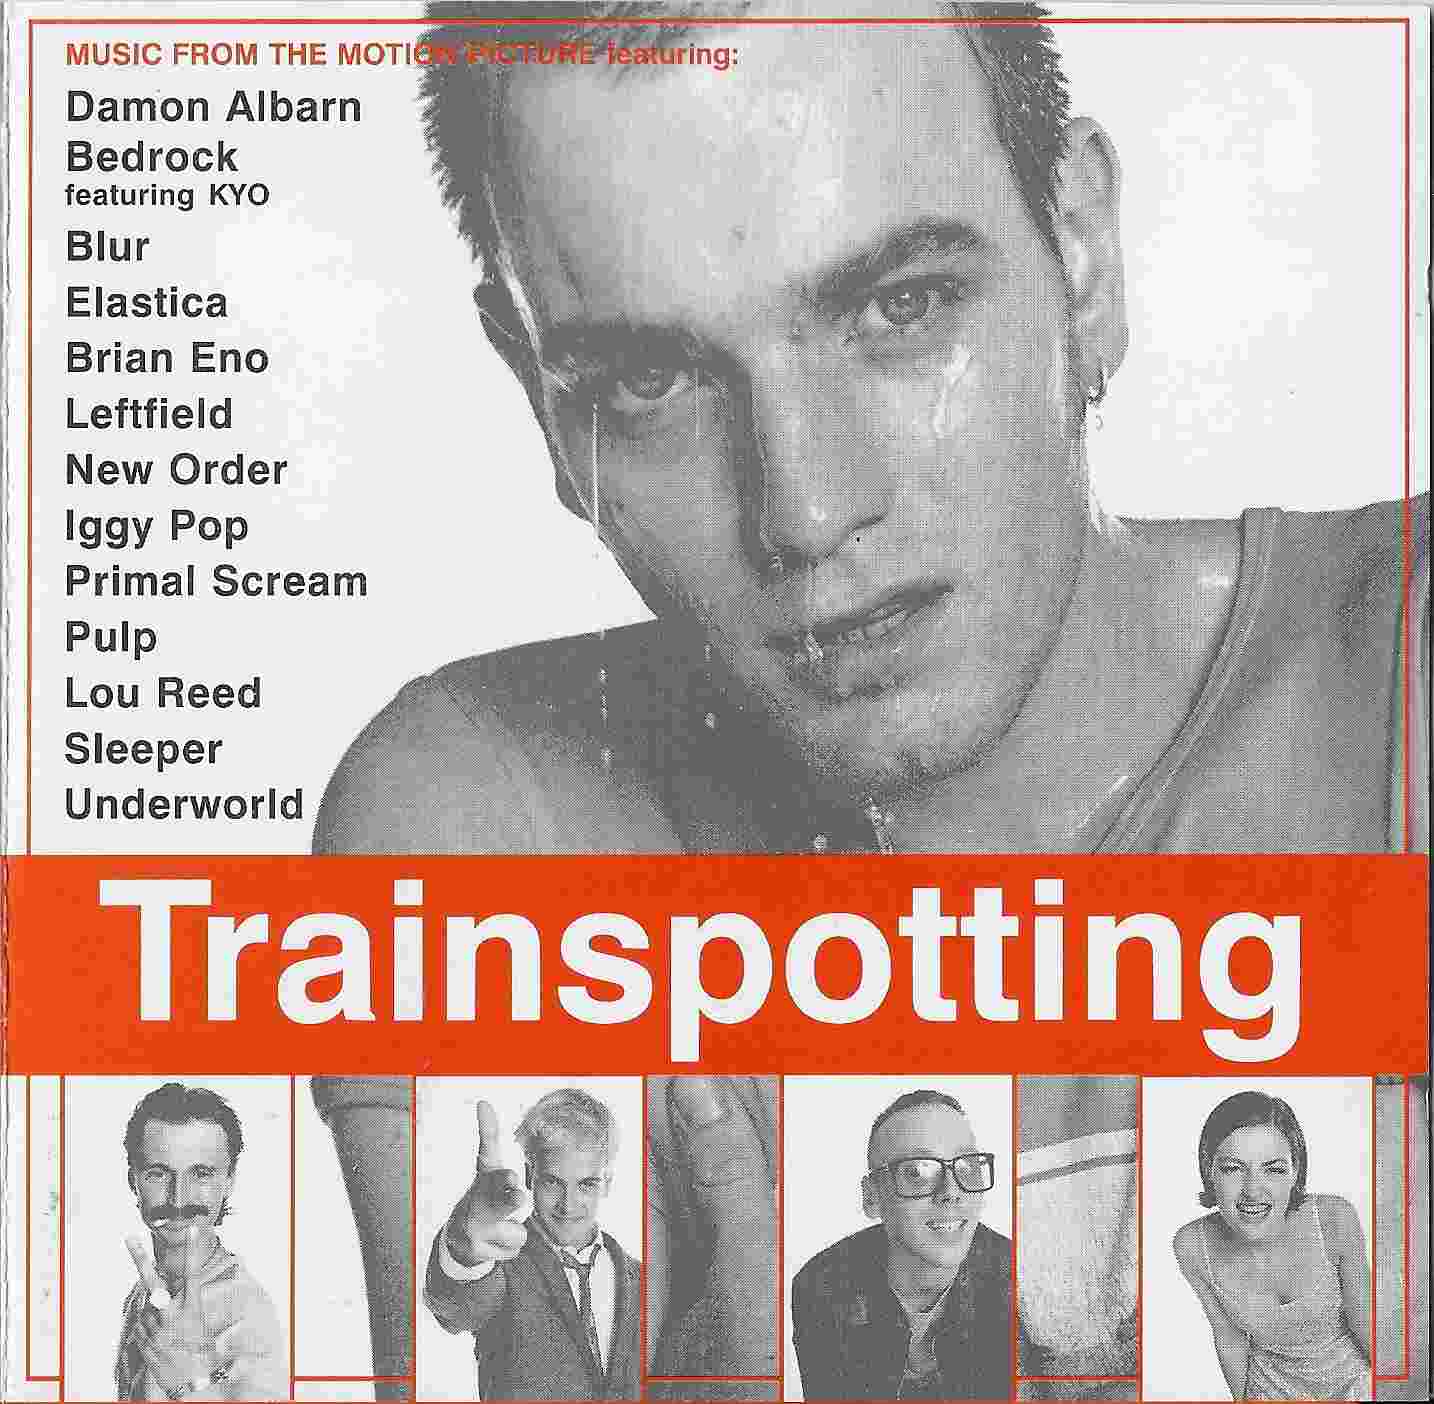 Picture of Trainspotting by artist Various from ITV, Channel 4 and Channel 5 cds library